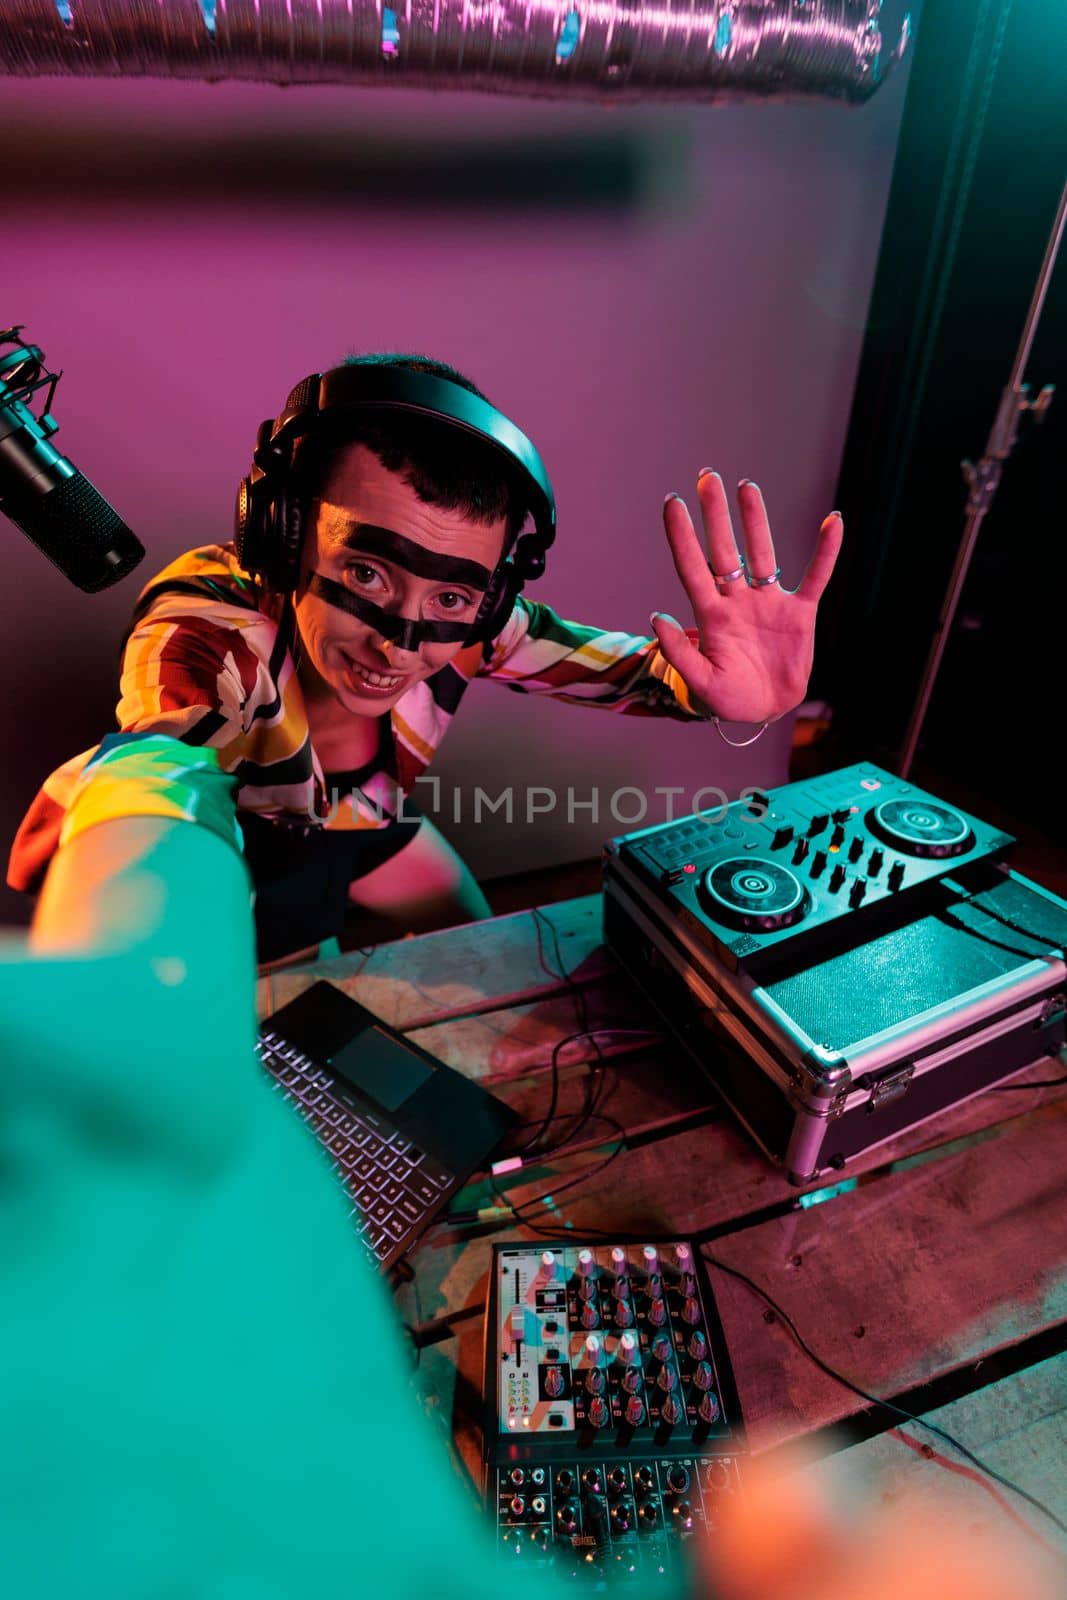 Woman dj artist mixing sounds on turntables, using buttons and bass key to mix techno music. Musician performing with mixer at nightclub, using electric control panel, disc jockey.